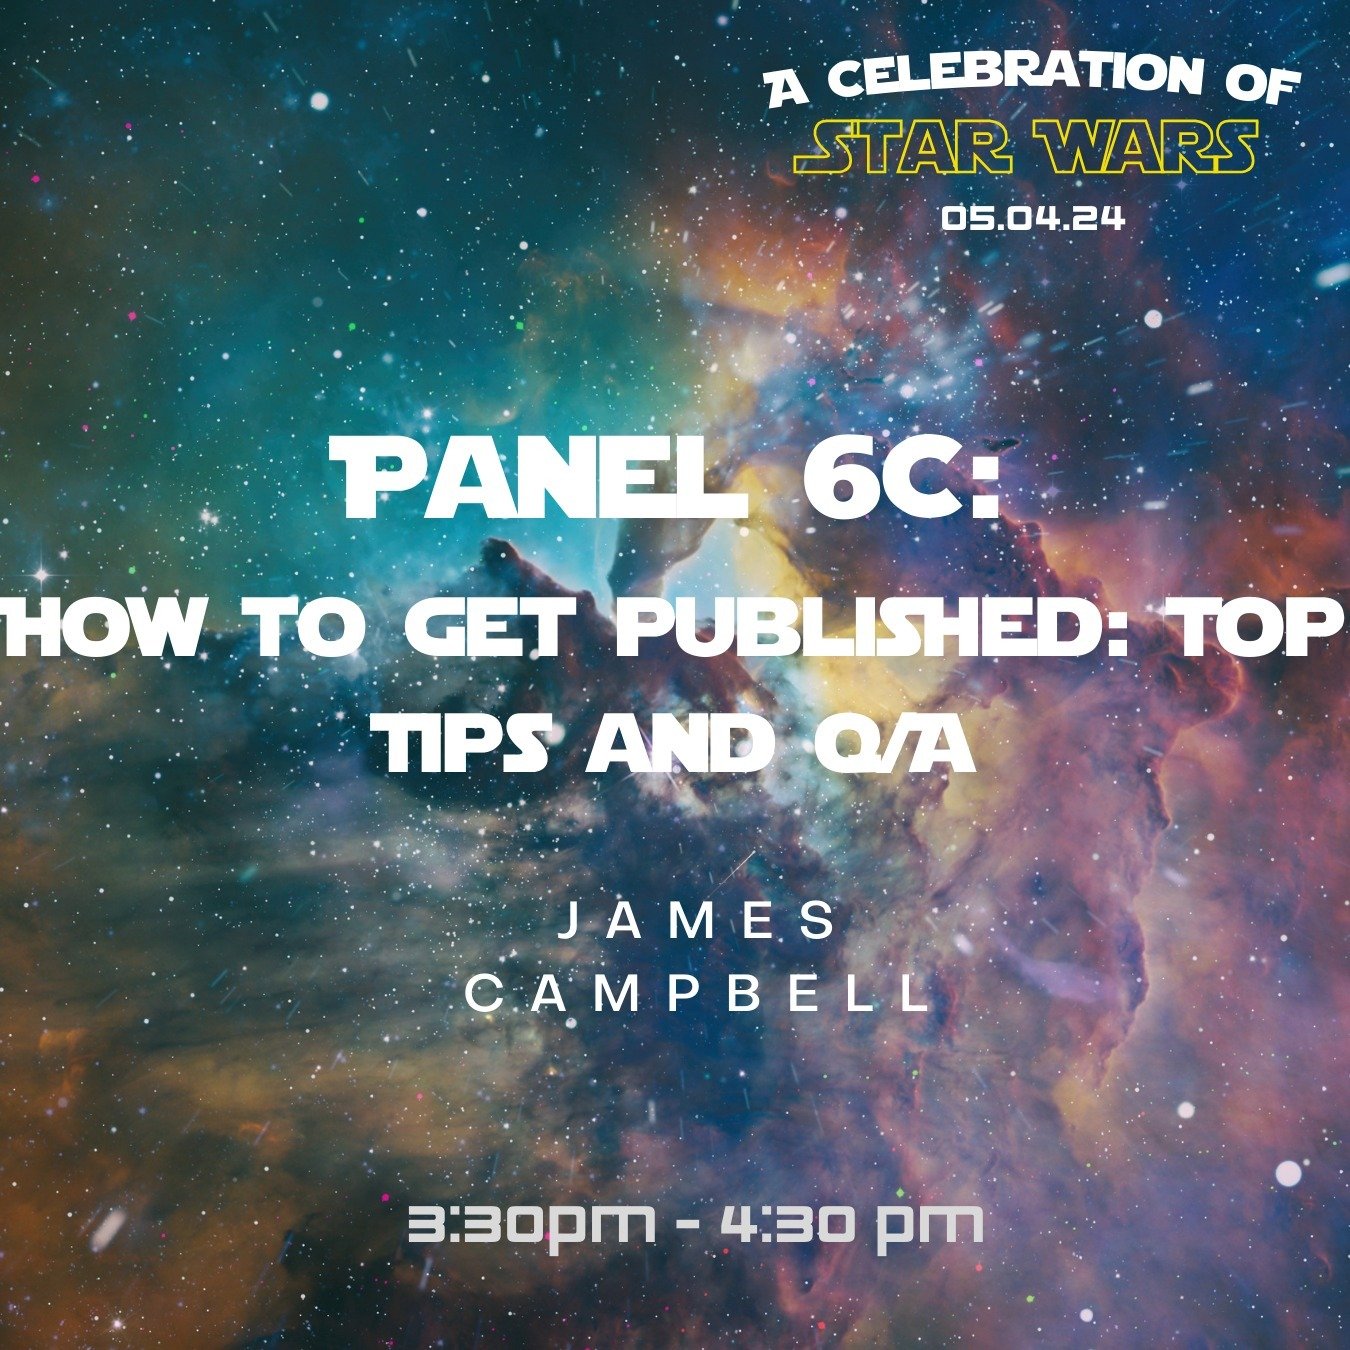 We&rsquo;re thrilled to be welcoming James Campbell from Intellect Books who will be speaking on &ldquo;How to get published: Top Tips and Q&amp;&rdquo; in Room 804 from 3:30 pm - 4:30 pm!